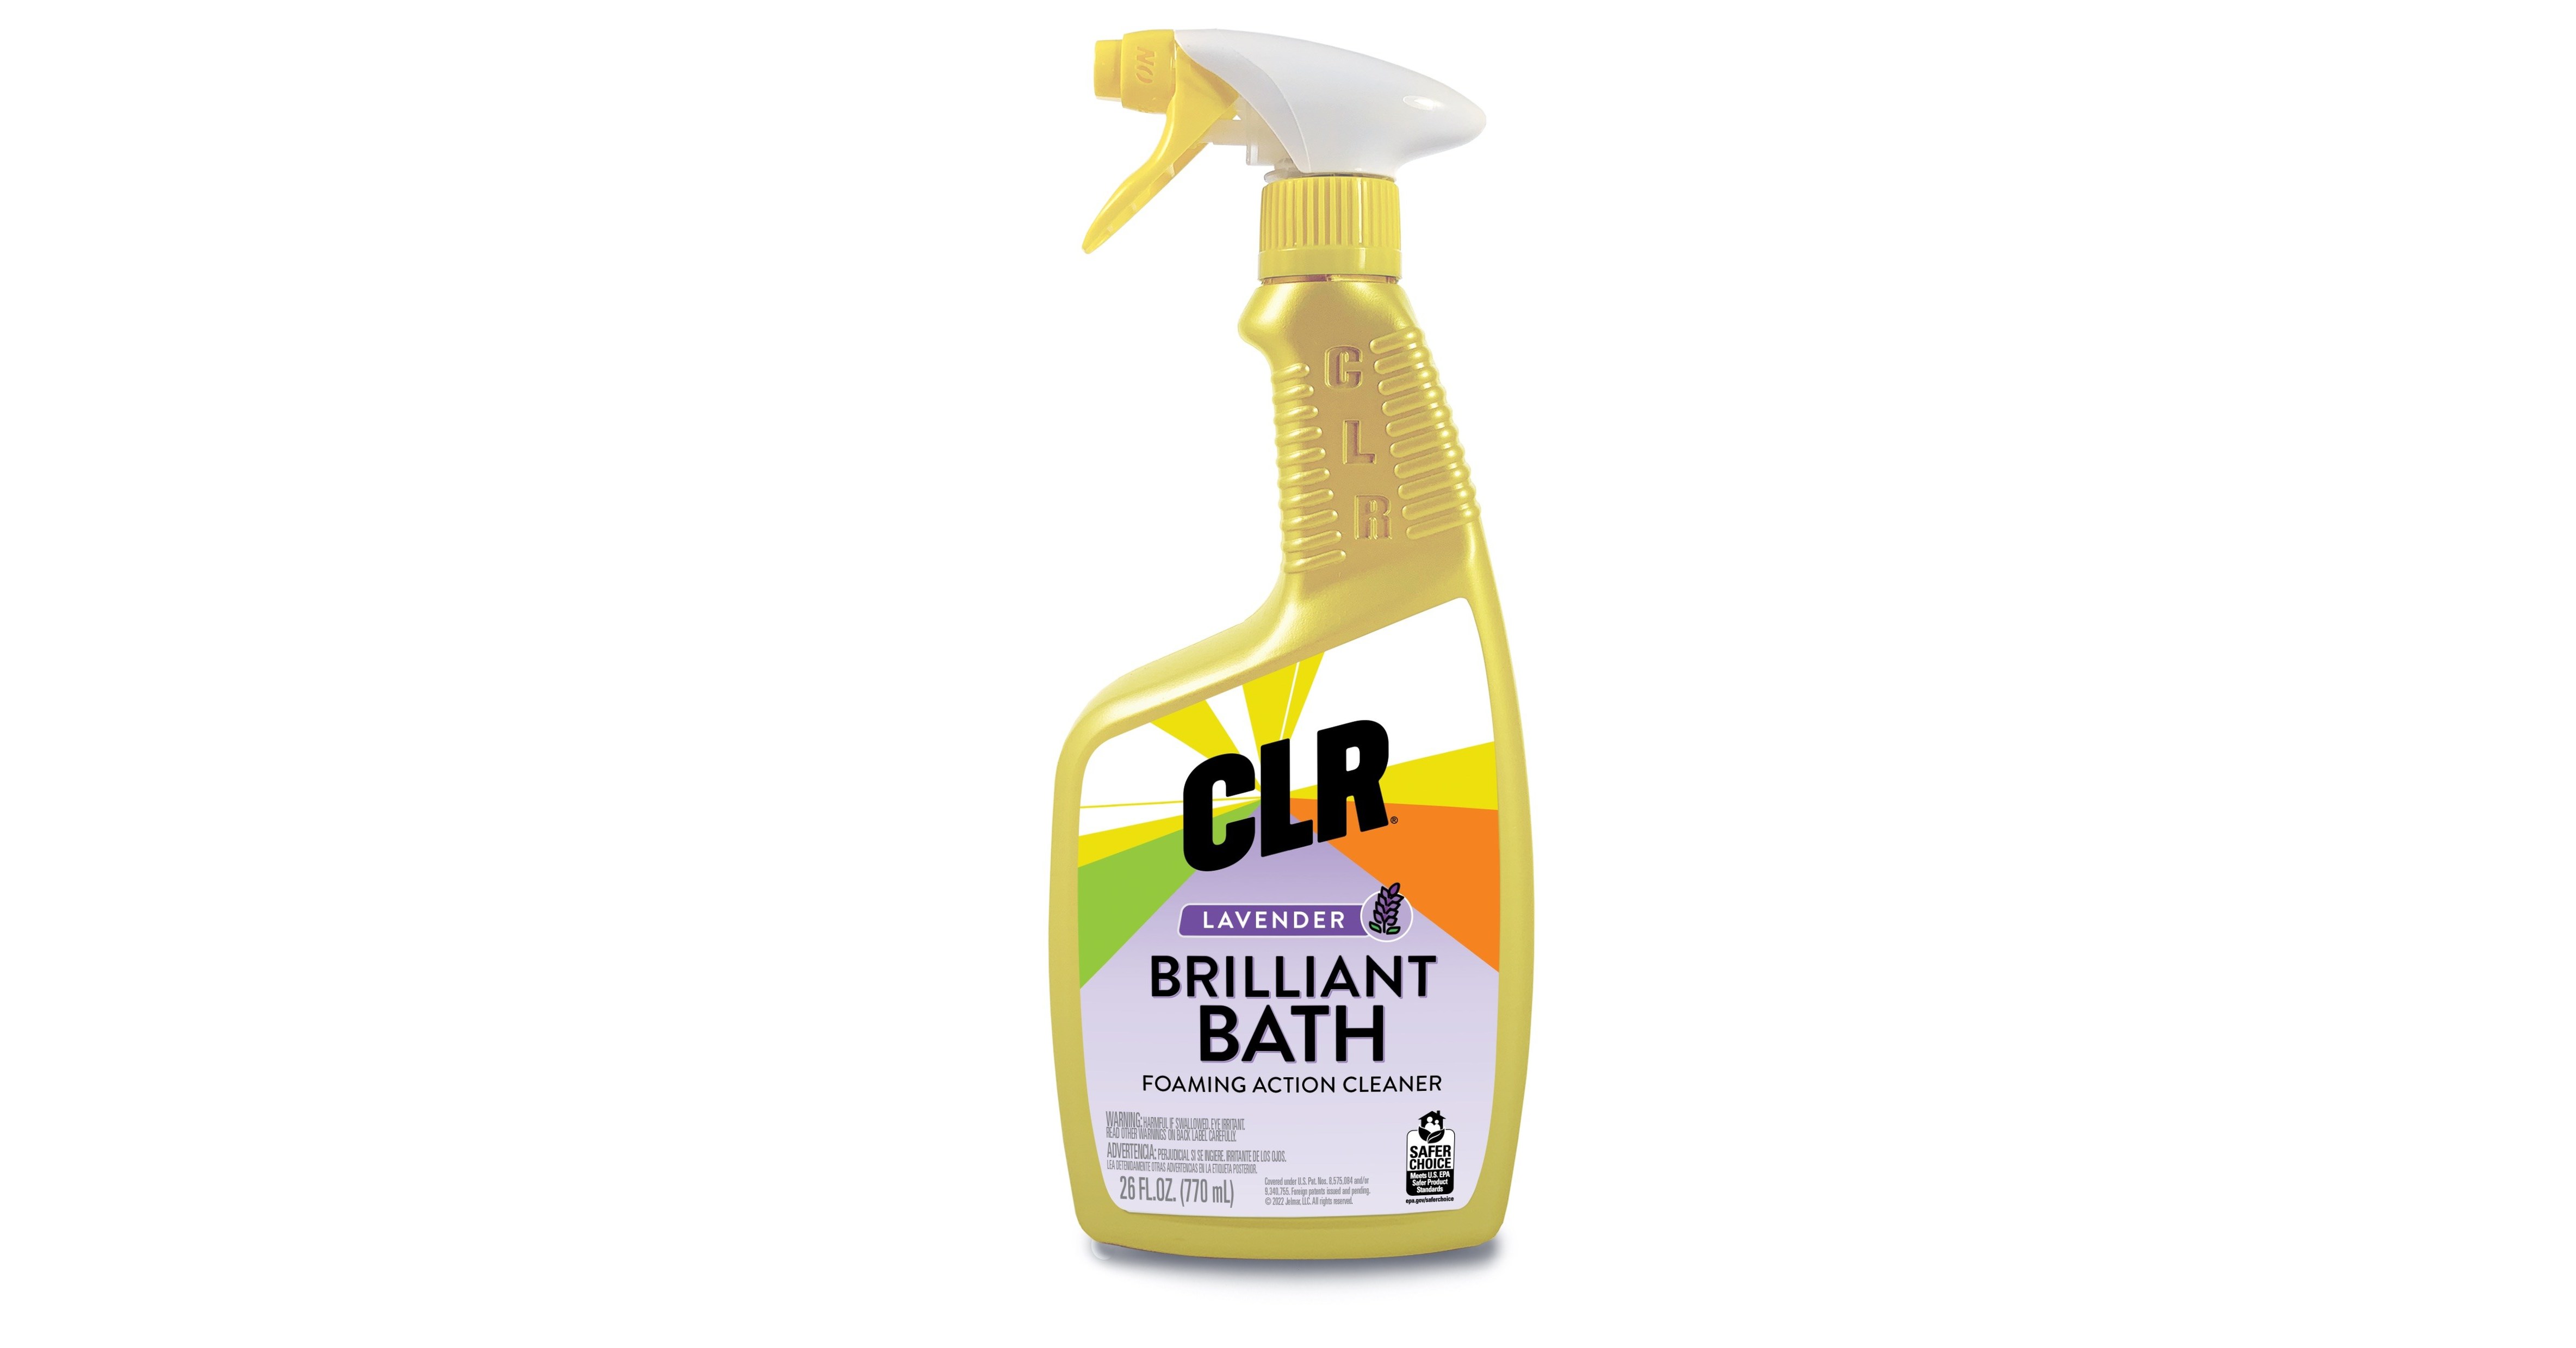 CLR Cleaning Brand Elevates Brilliant Bath Cleaning Product With New Lavender Fragrance